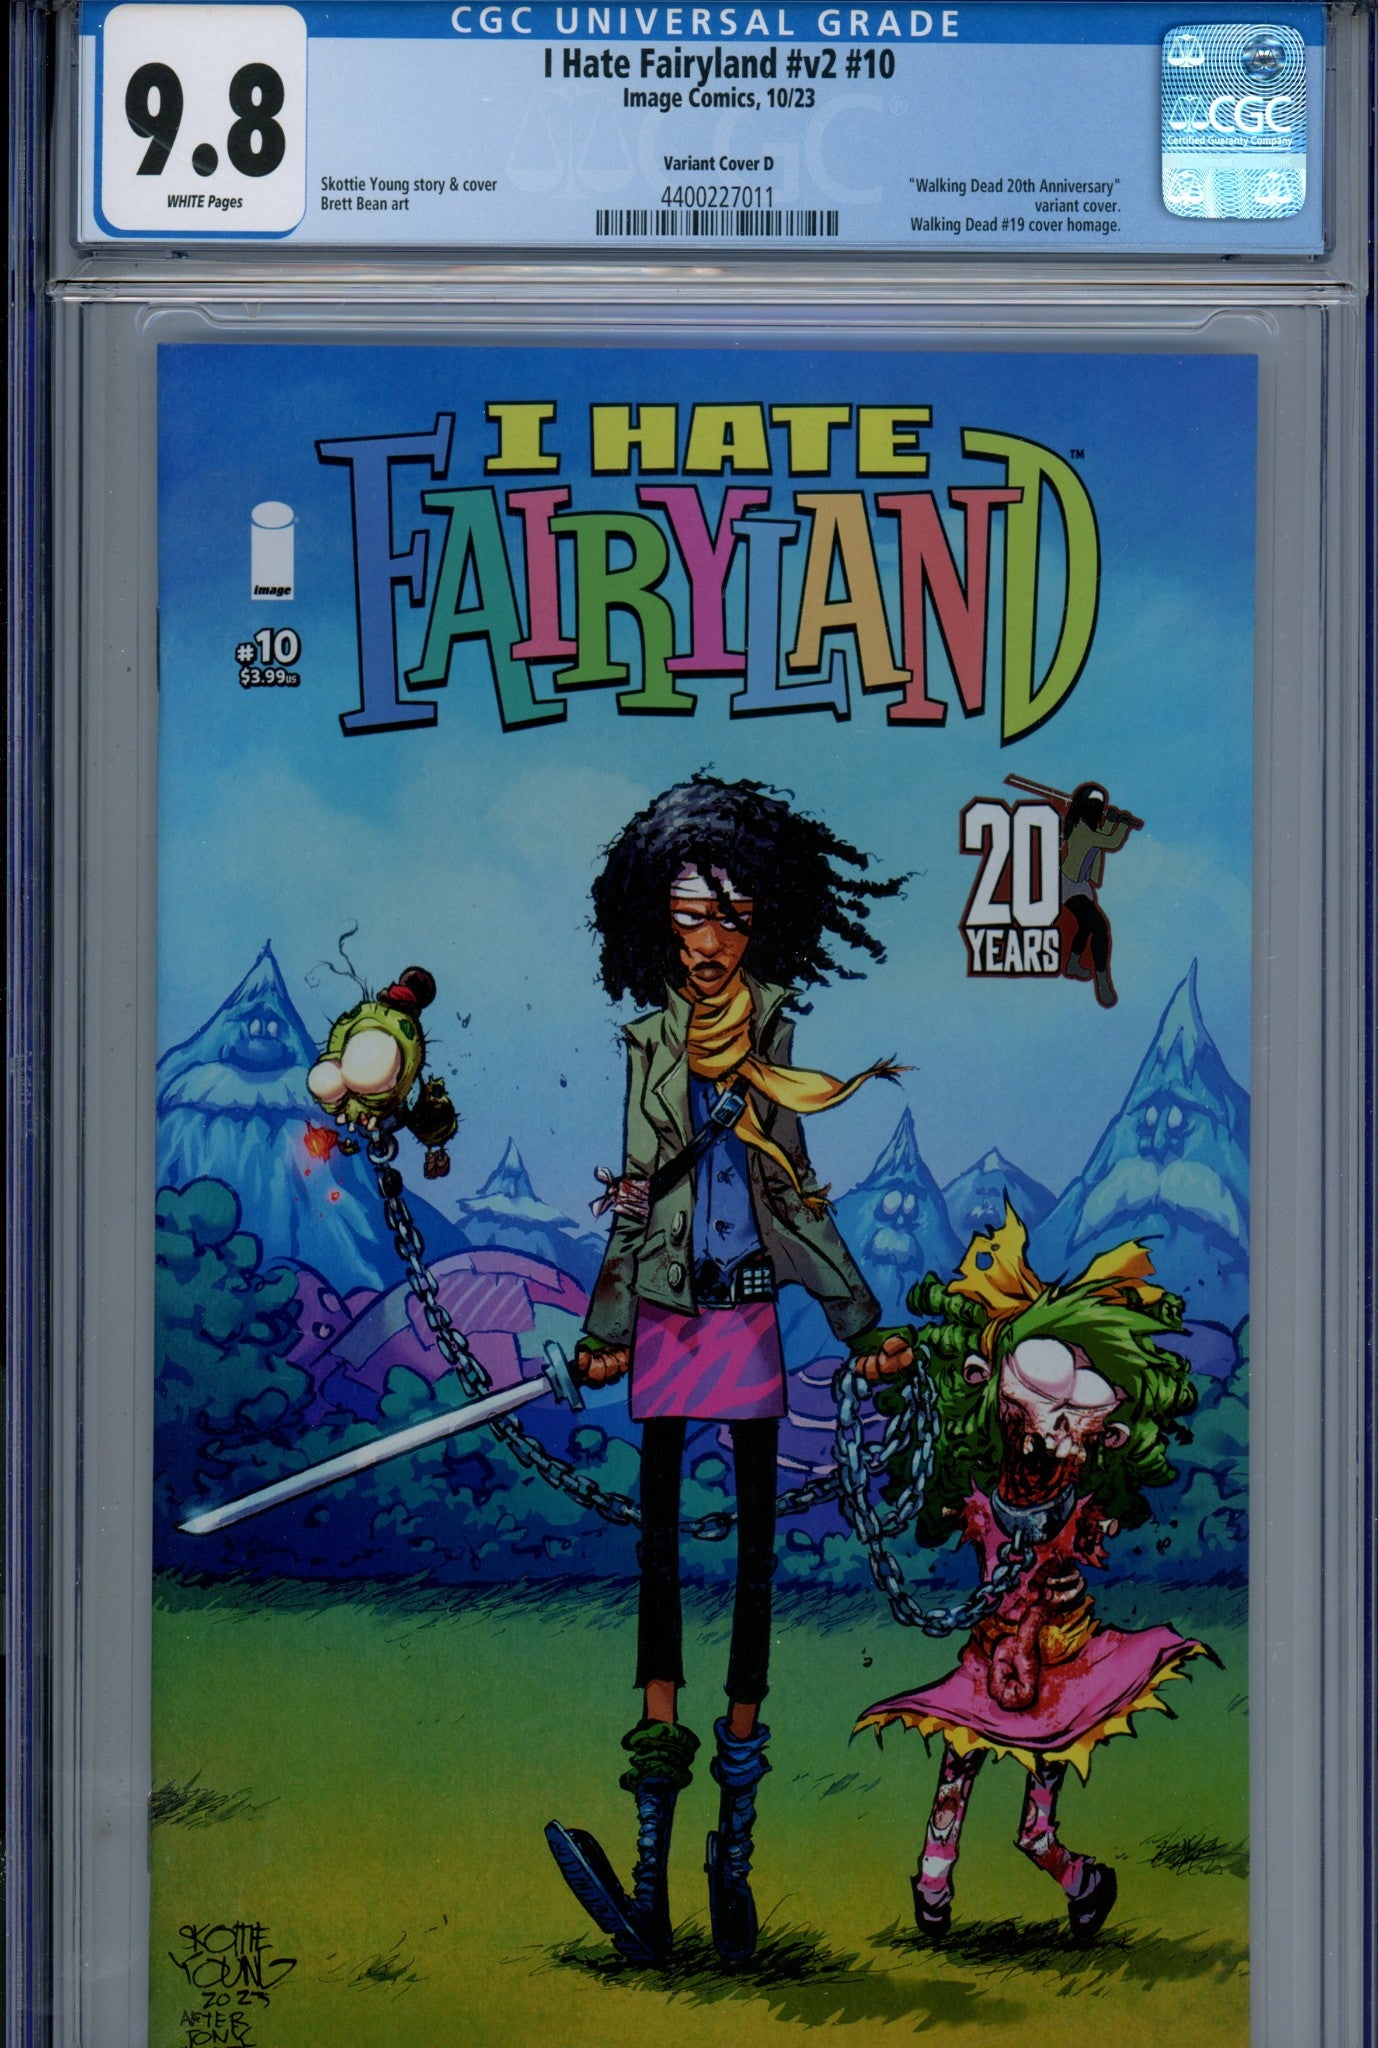 I Hate Fairyland Vol 2 10 CGC 9.8 (NM/M) (2023) Young Homage Variant 